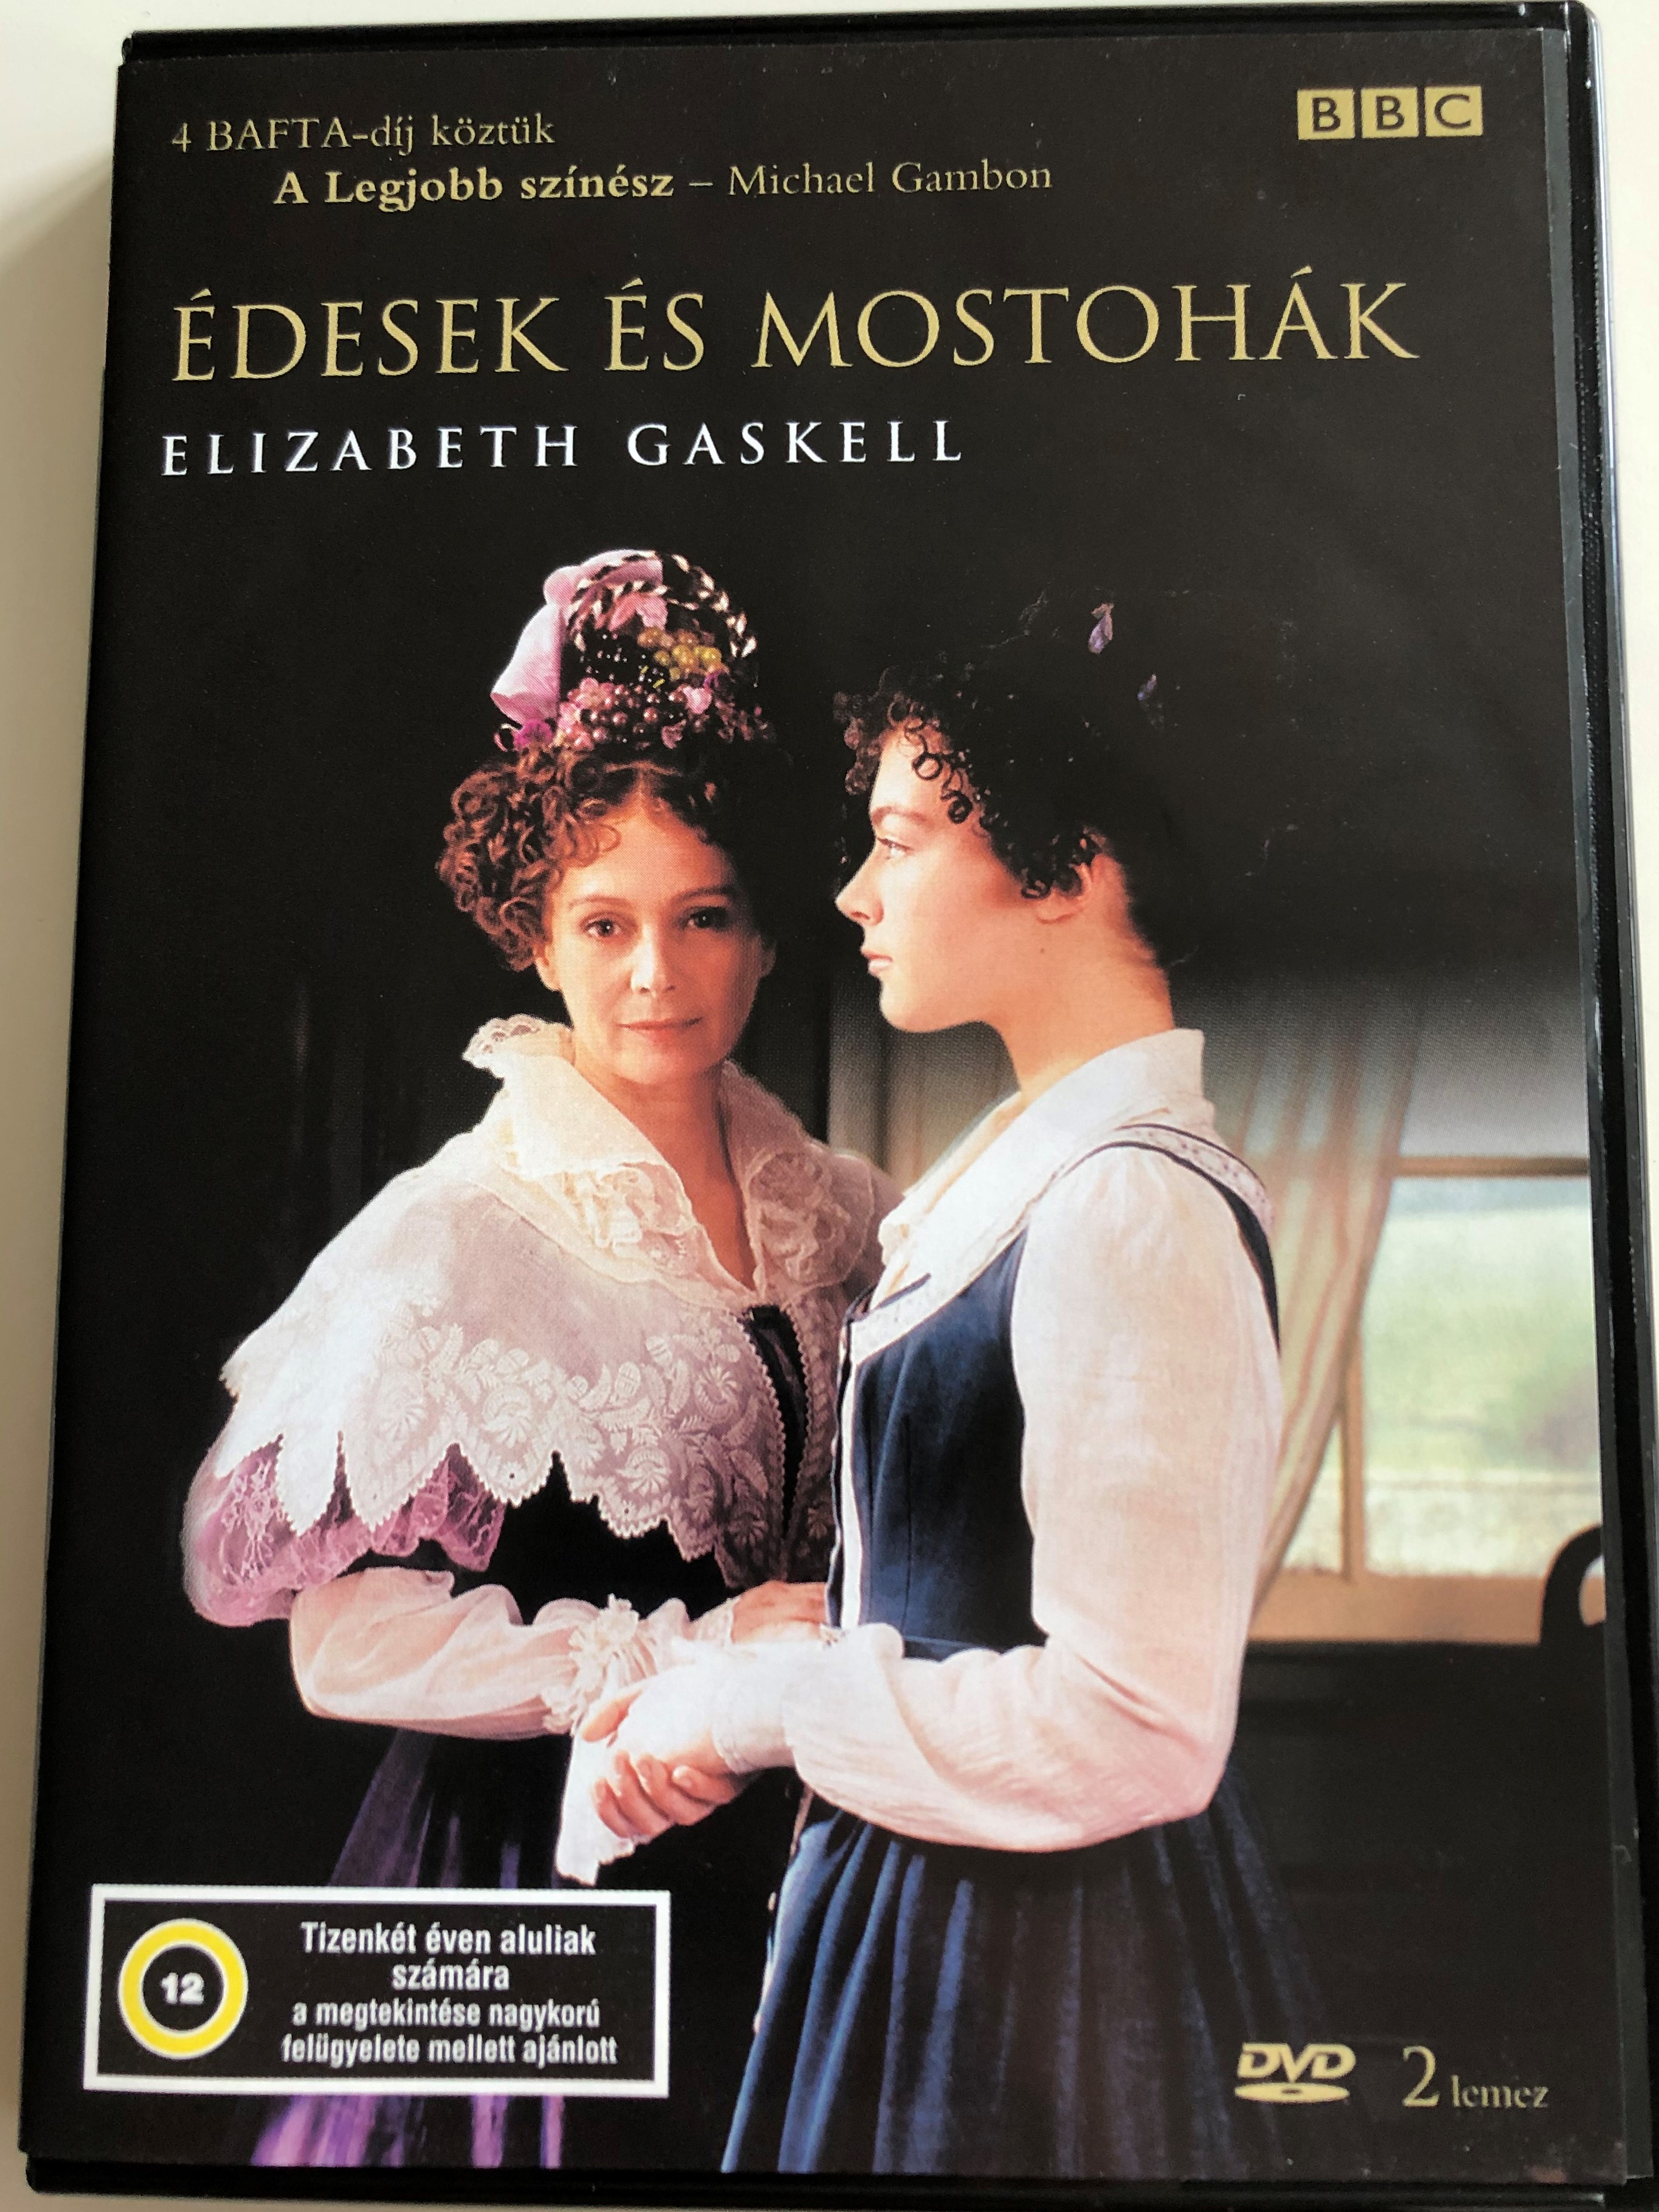 wives-and-daughters-dvd-1999-desek-s-mostoh-k-bbc-miniseries-directed-by-nicholas-renton-starring-justine-waddell-bill-paterson-francesca-annis-keeley-hawes-tom-hollander-iain-glen-anthony-howell-michael-gambon-1-.jpg